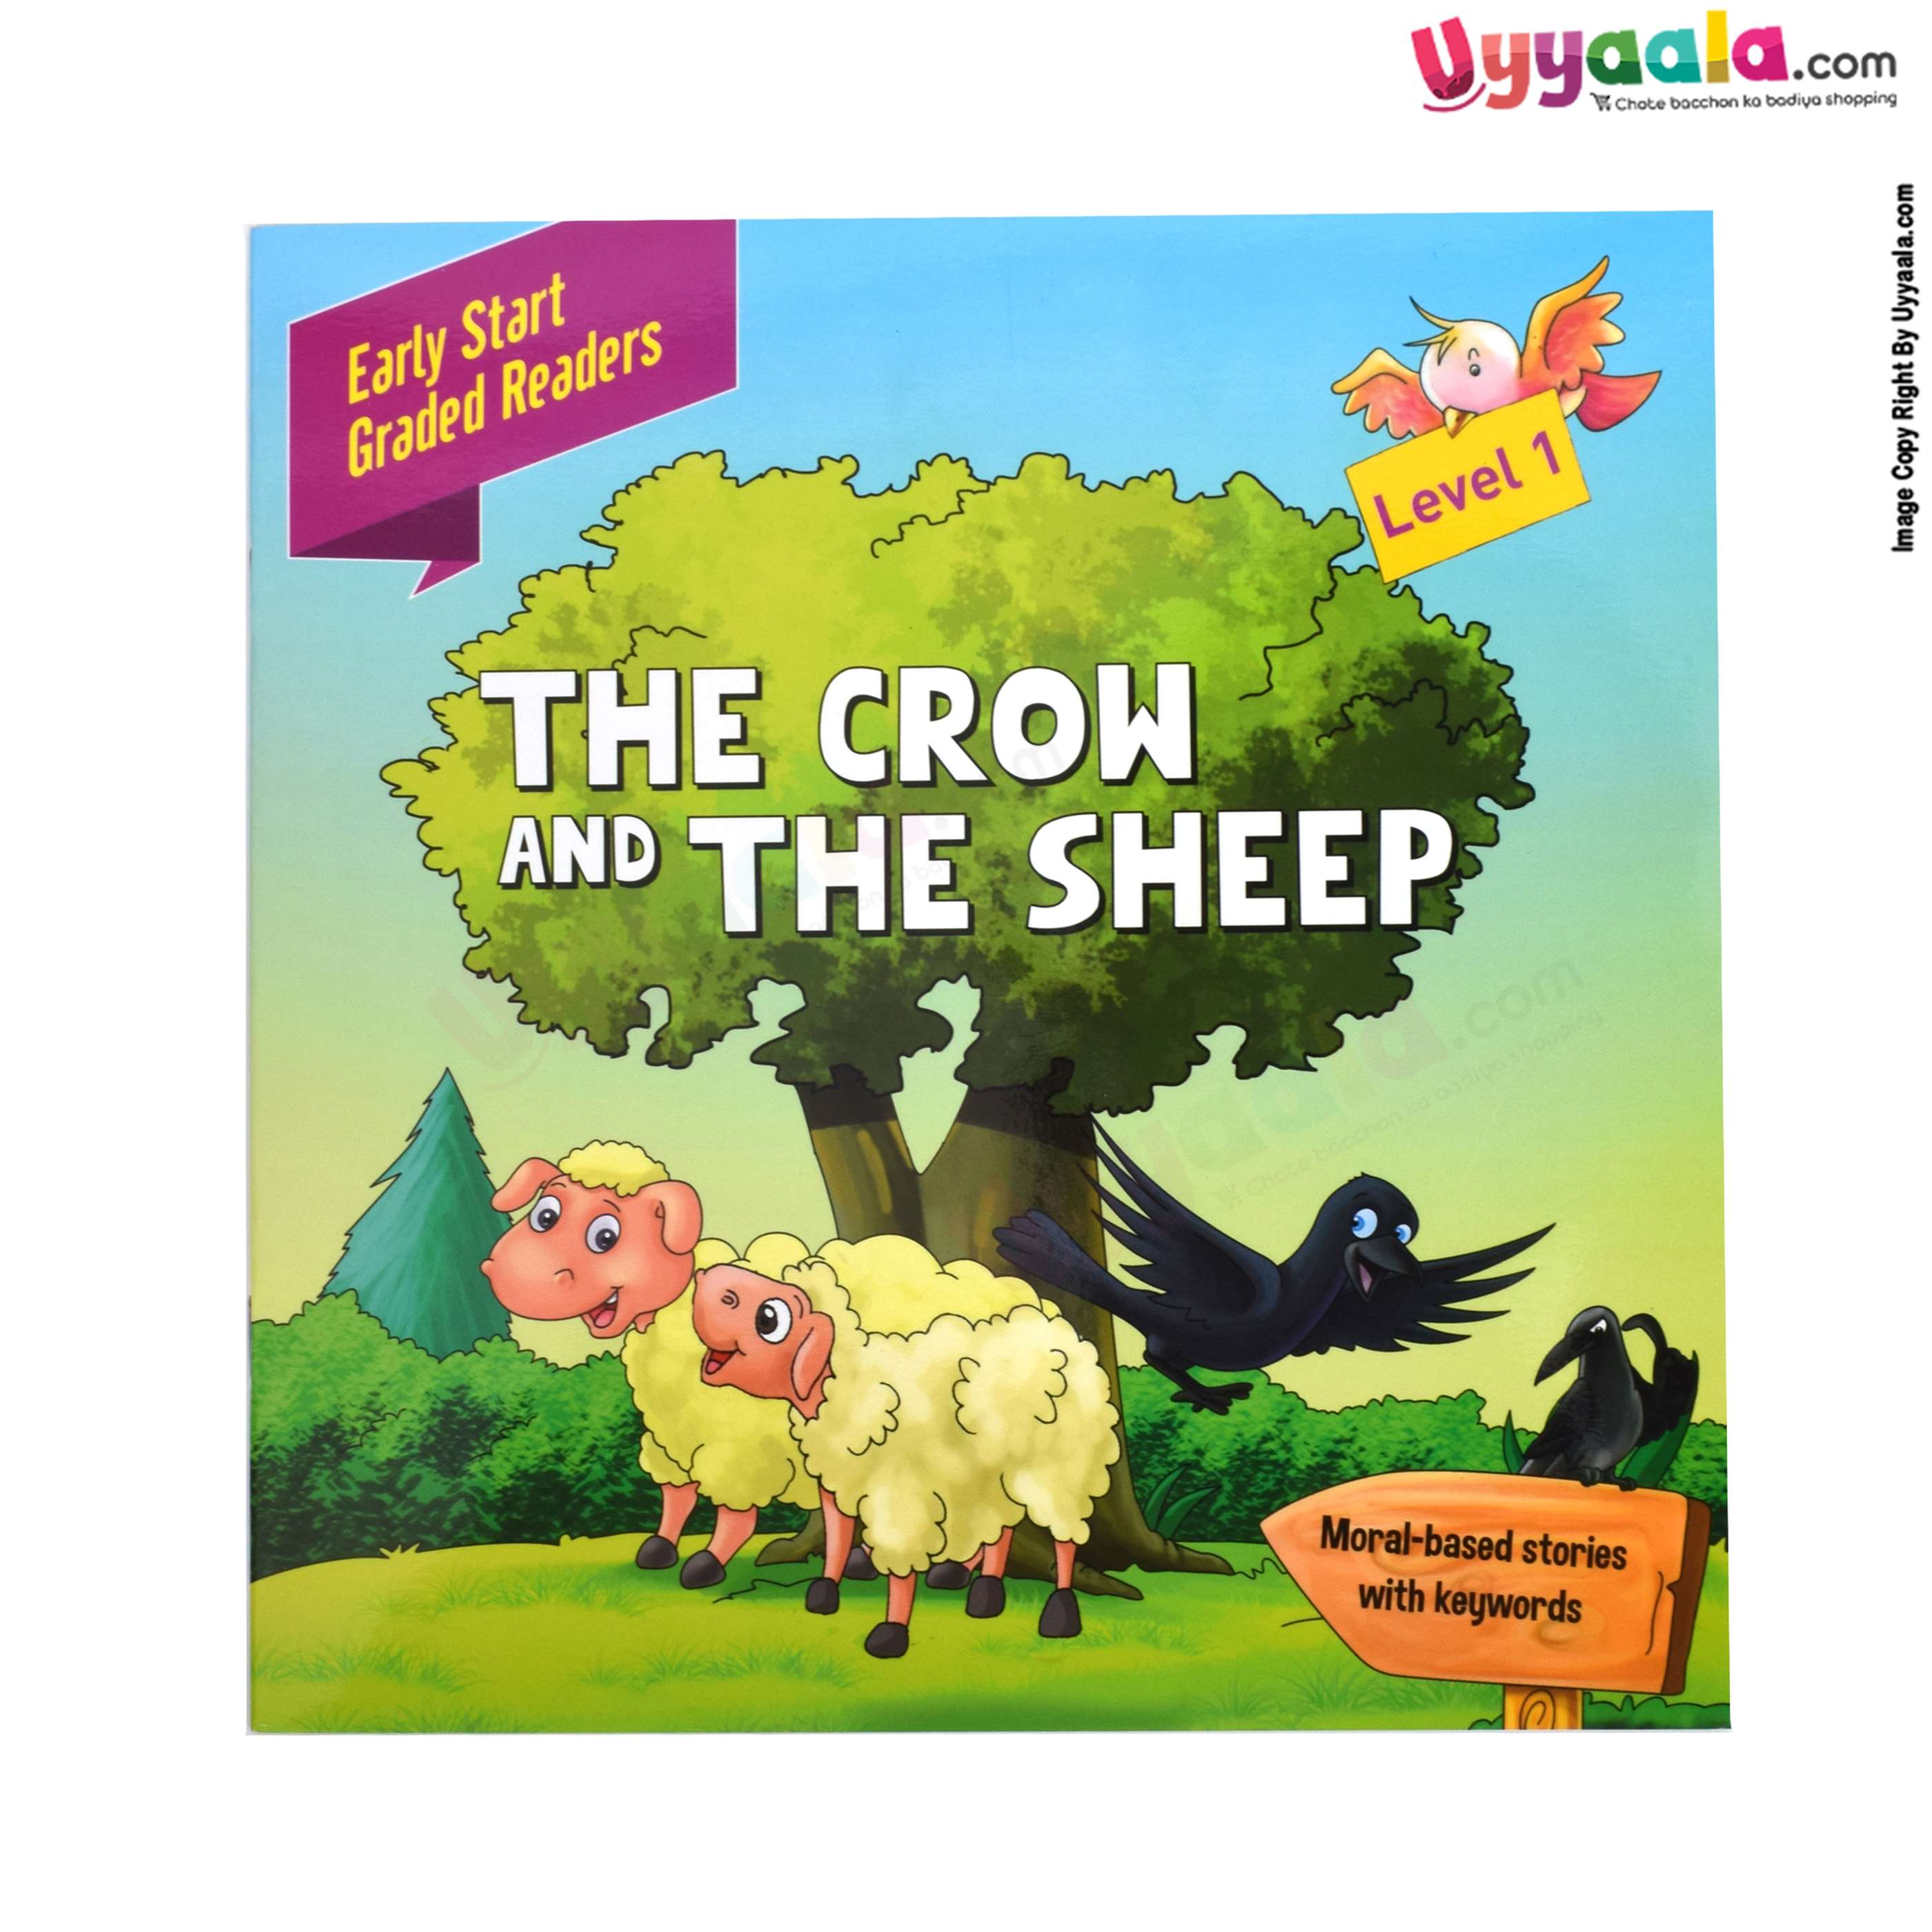 Early start graded readers -moral based stories, the crow and the sheep, level - 1 (2 - 5 years)